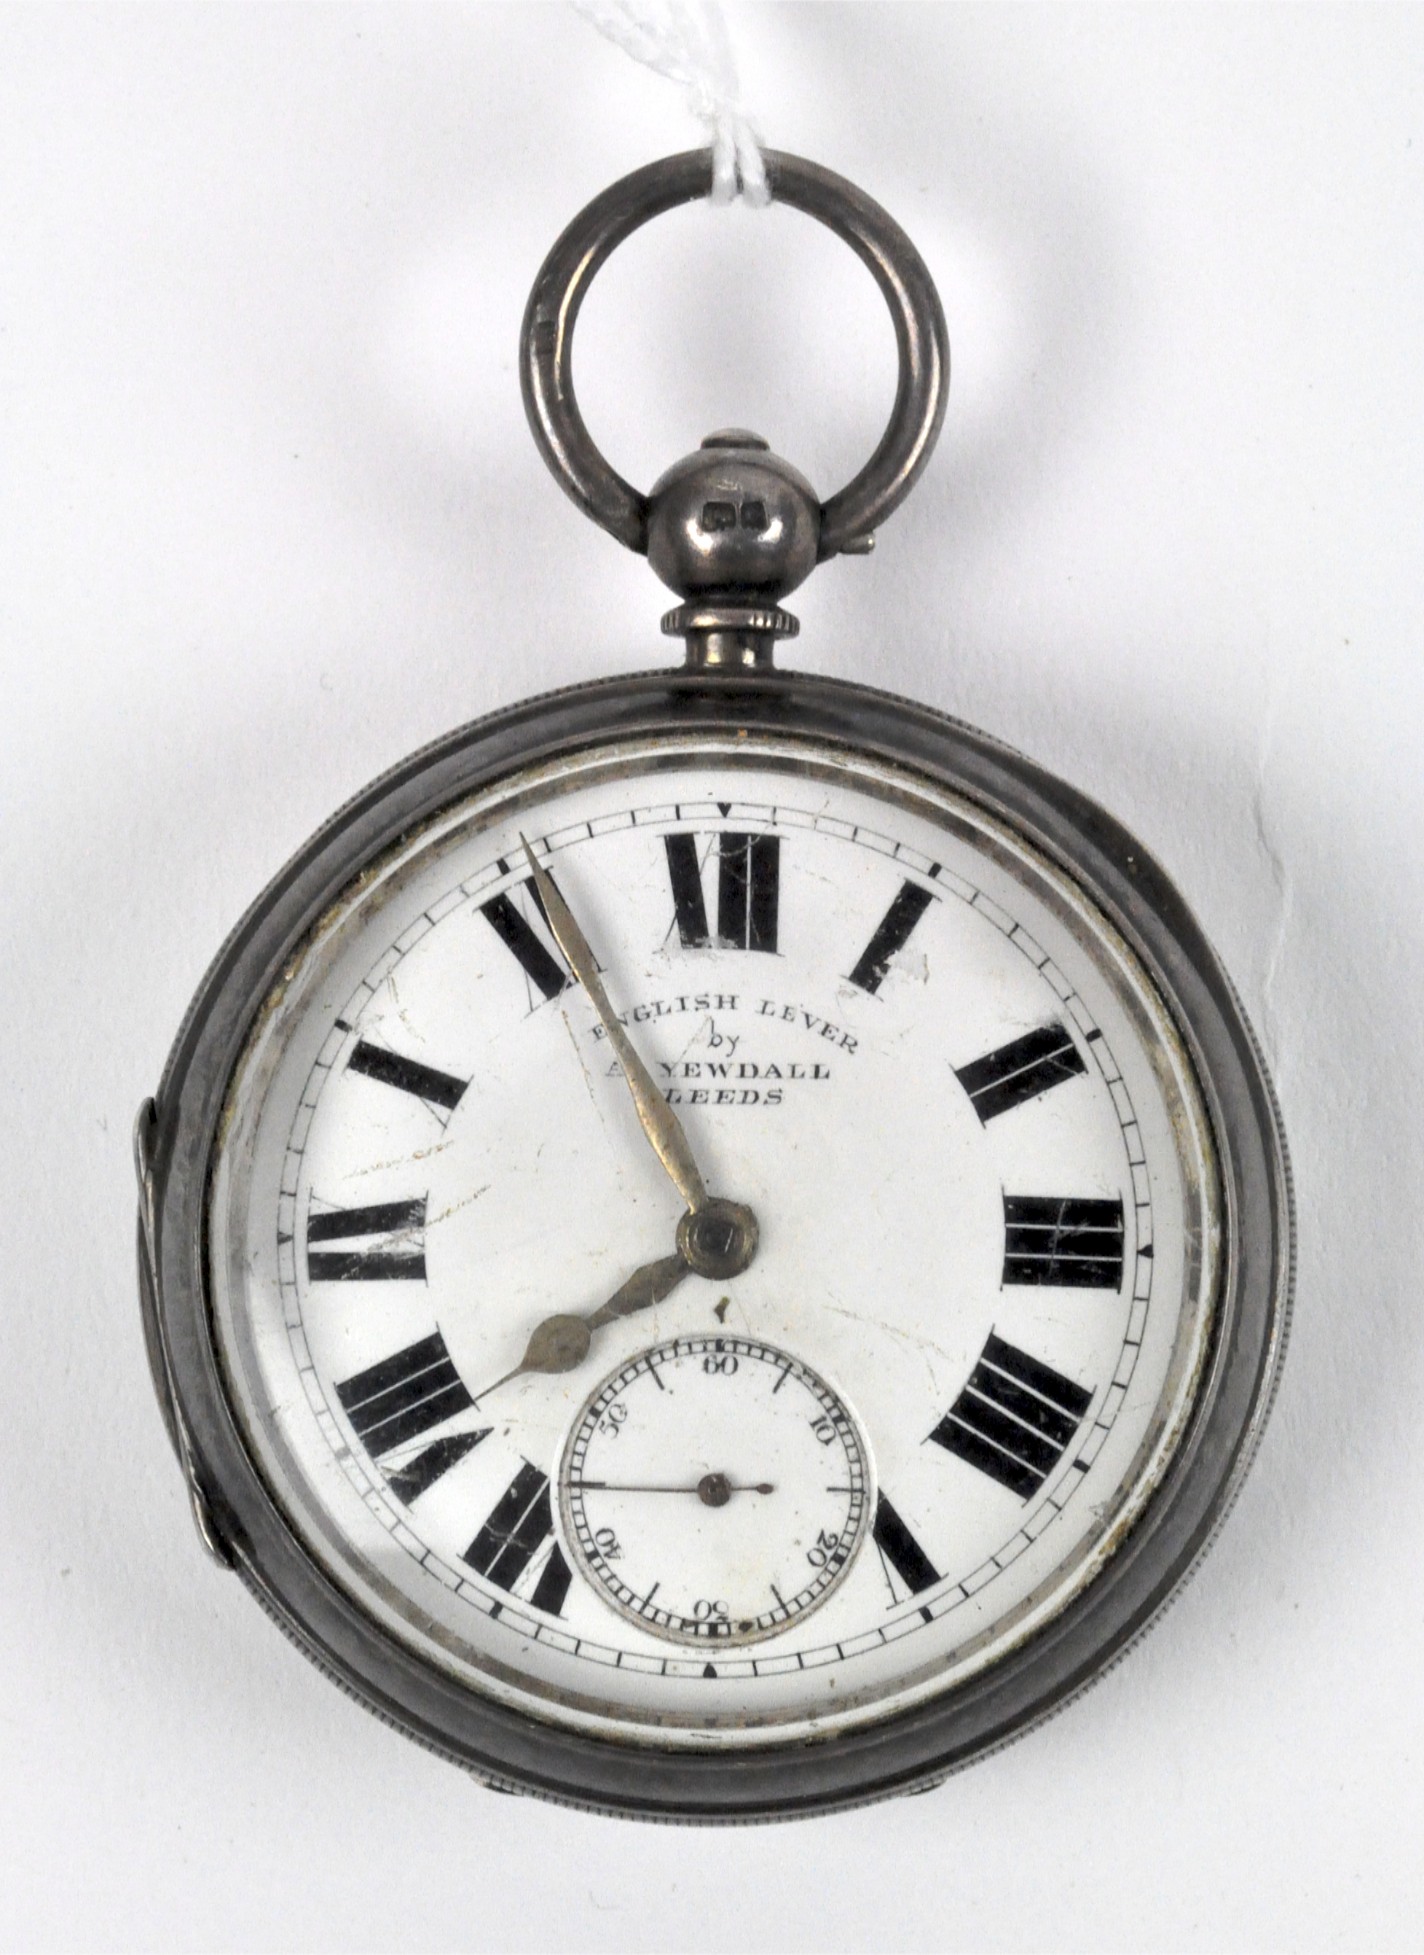 An Edwardian silver open faced pocket watch, retailed as English Lever by A Yewdall, Leeds,